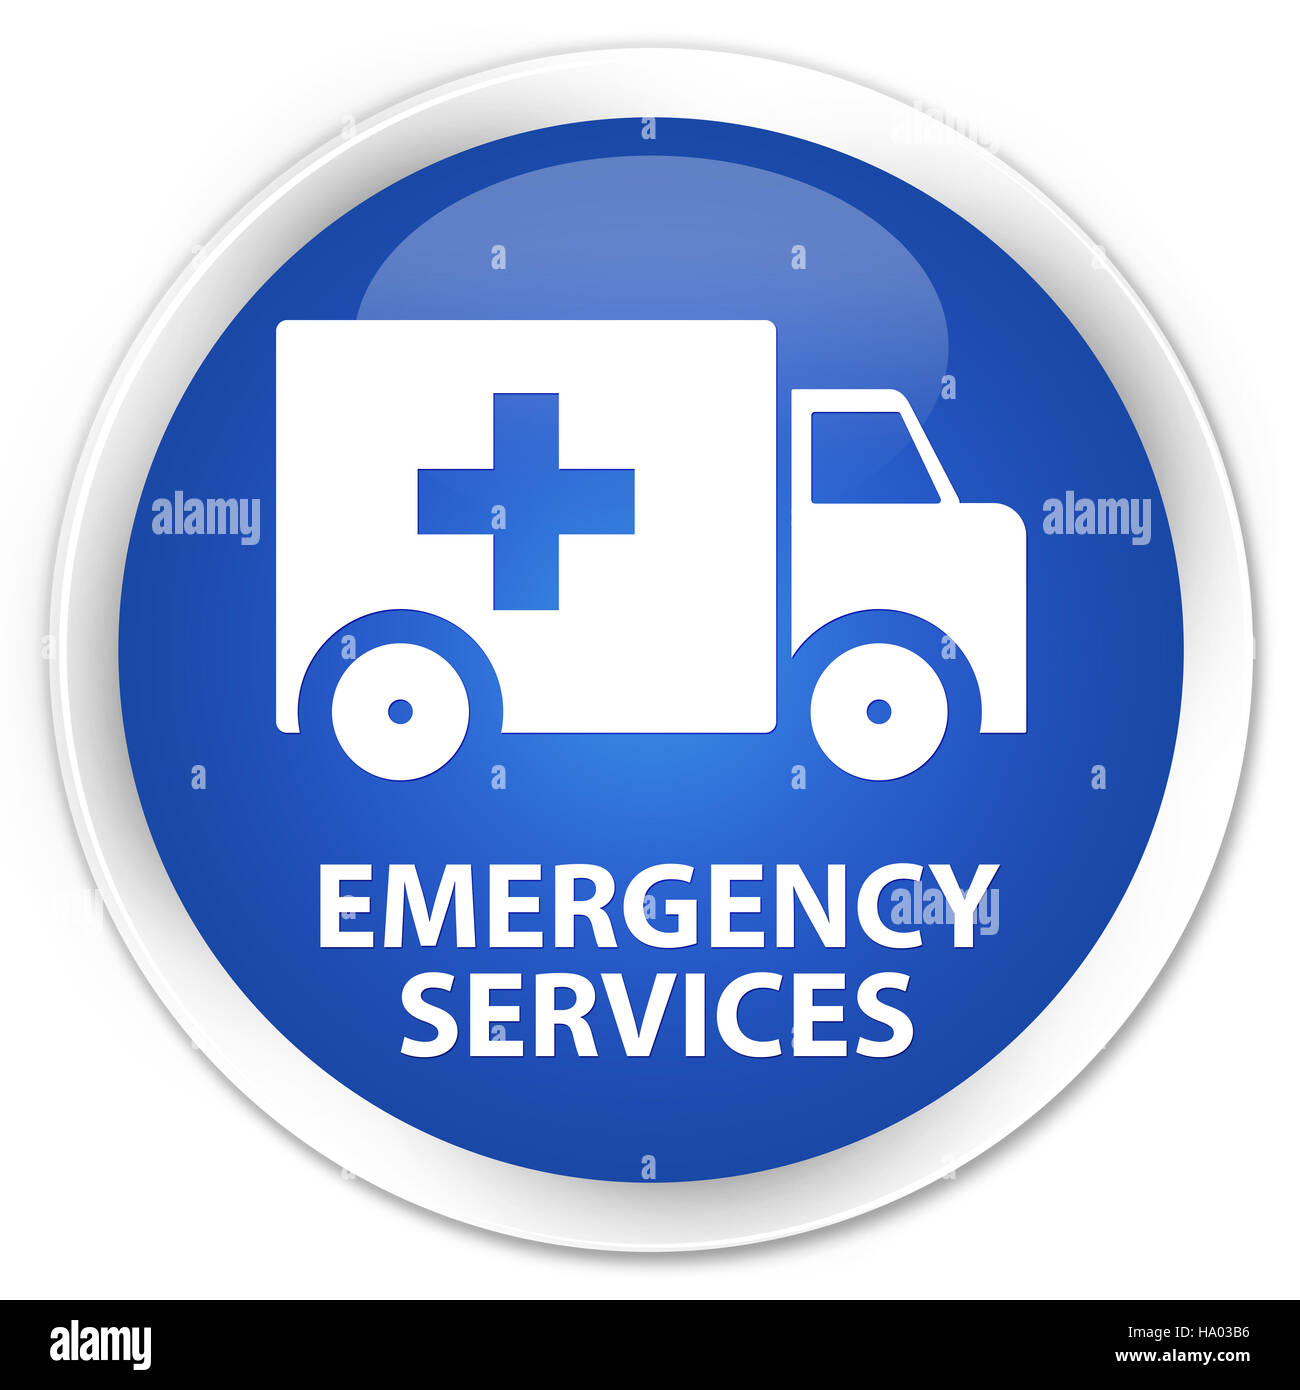 Emergency services isolated on premium blue round button abstract illustration Stock Photo